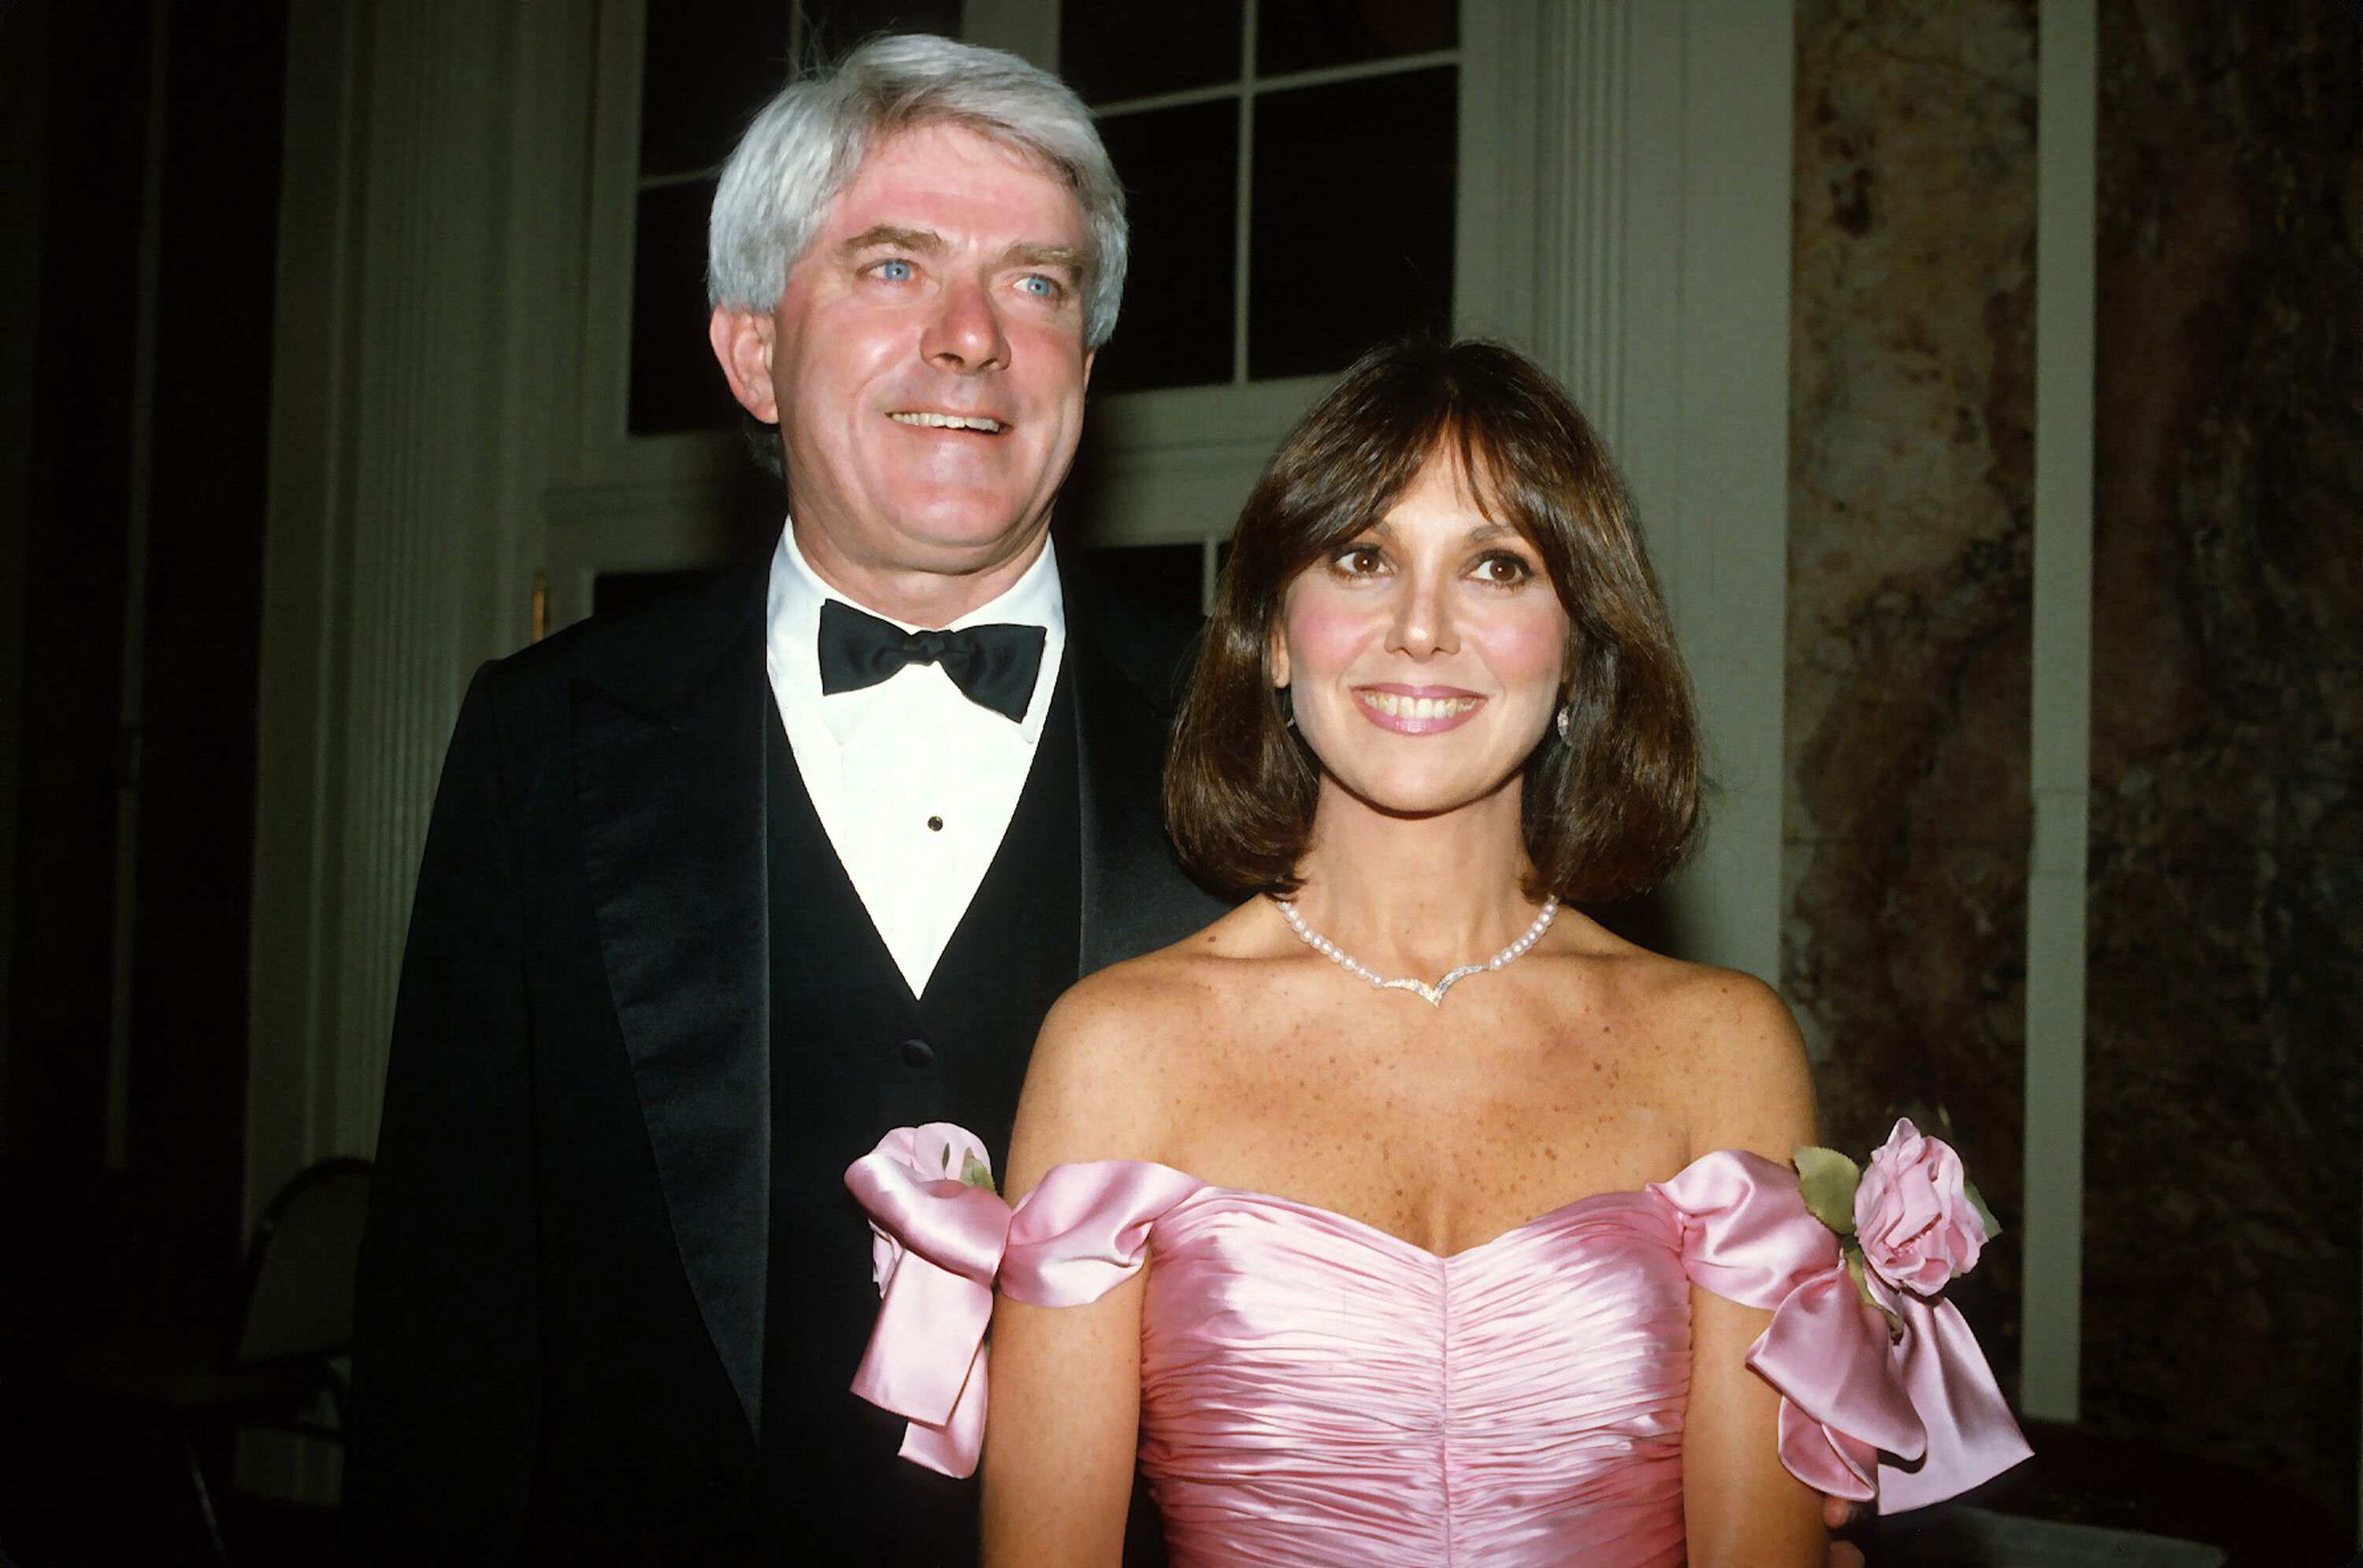 Phil Donohue and Marlo Thomas pose for a photograph at Gloria Steinem's 50th birthday celebration. | Source: Getty Images